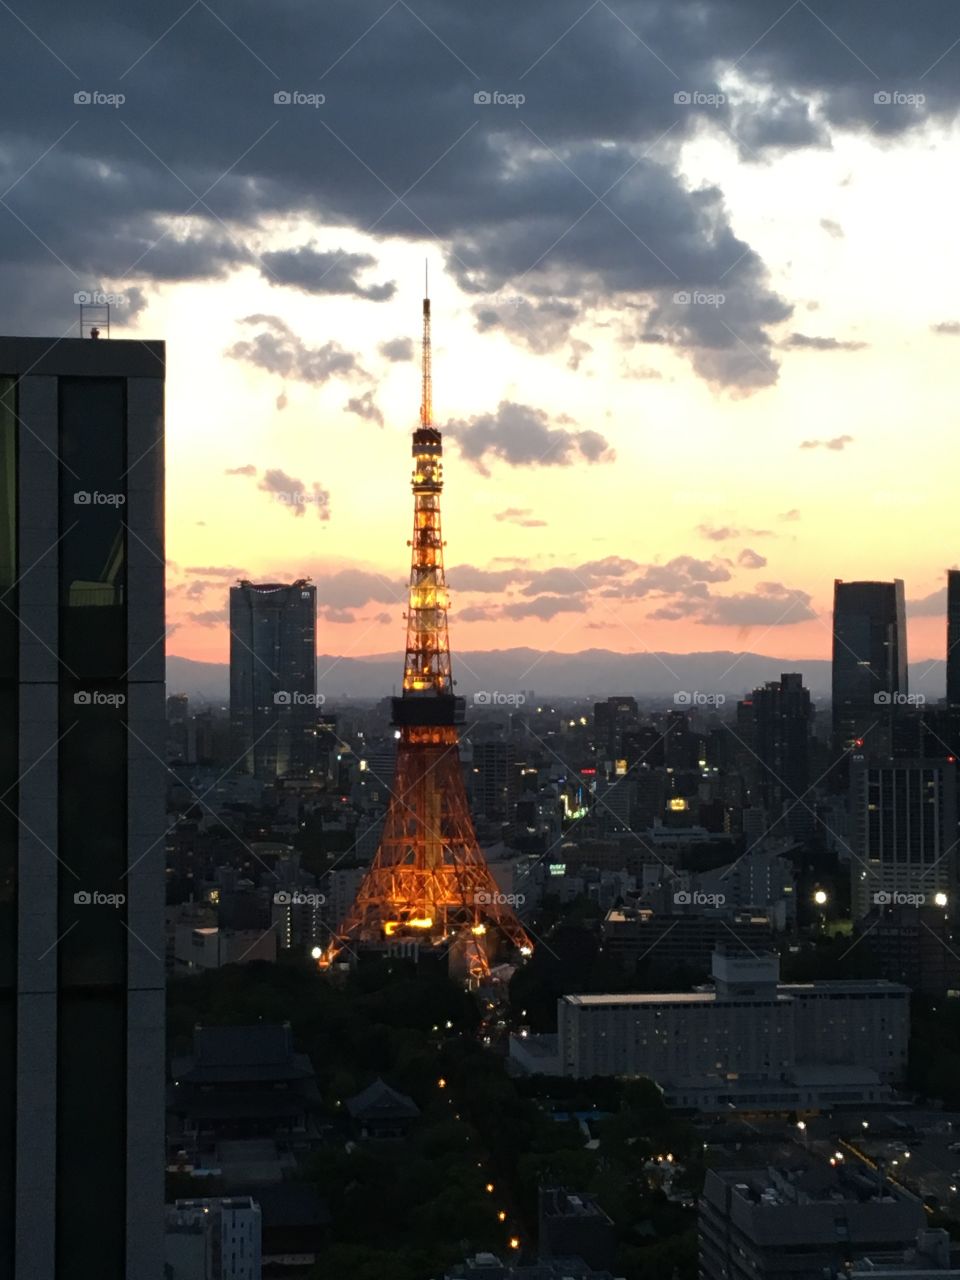 I like Tokyo Tower at this time ！！